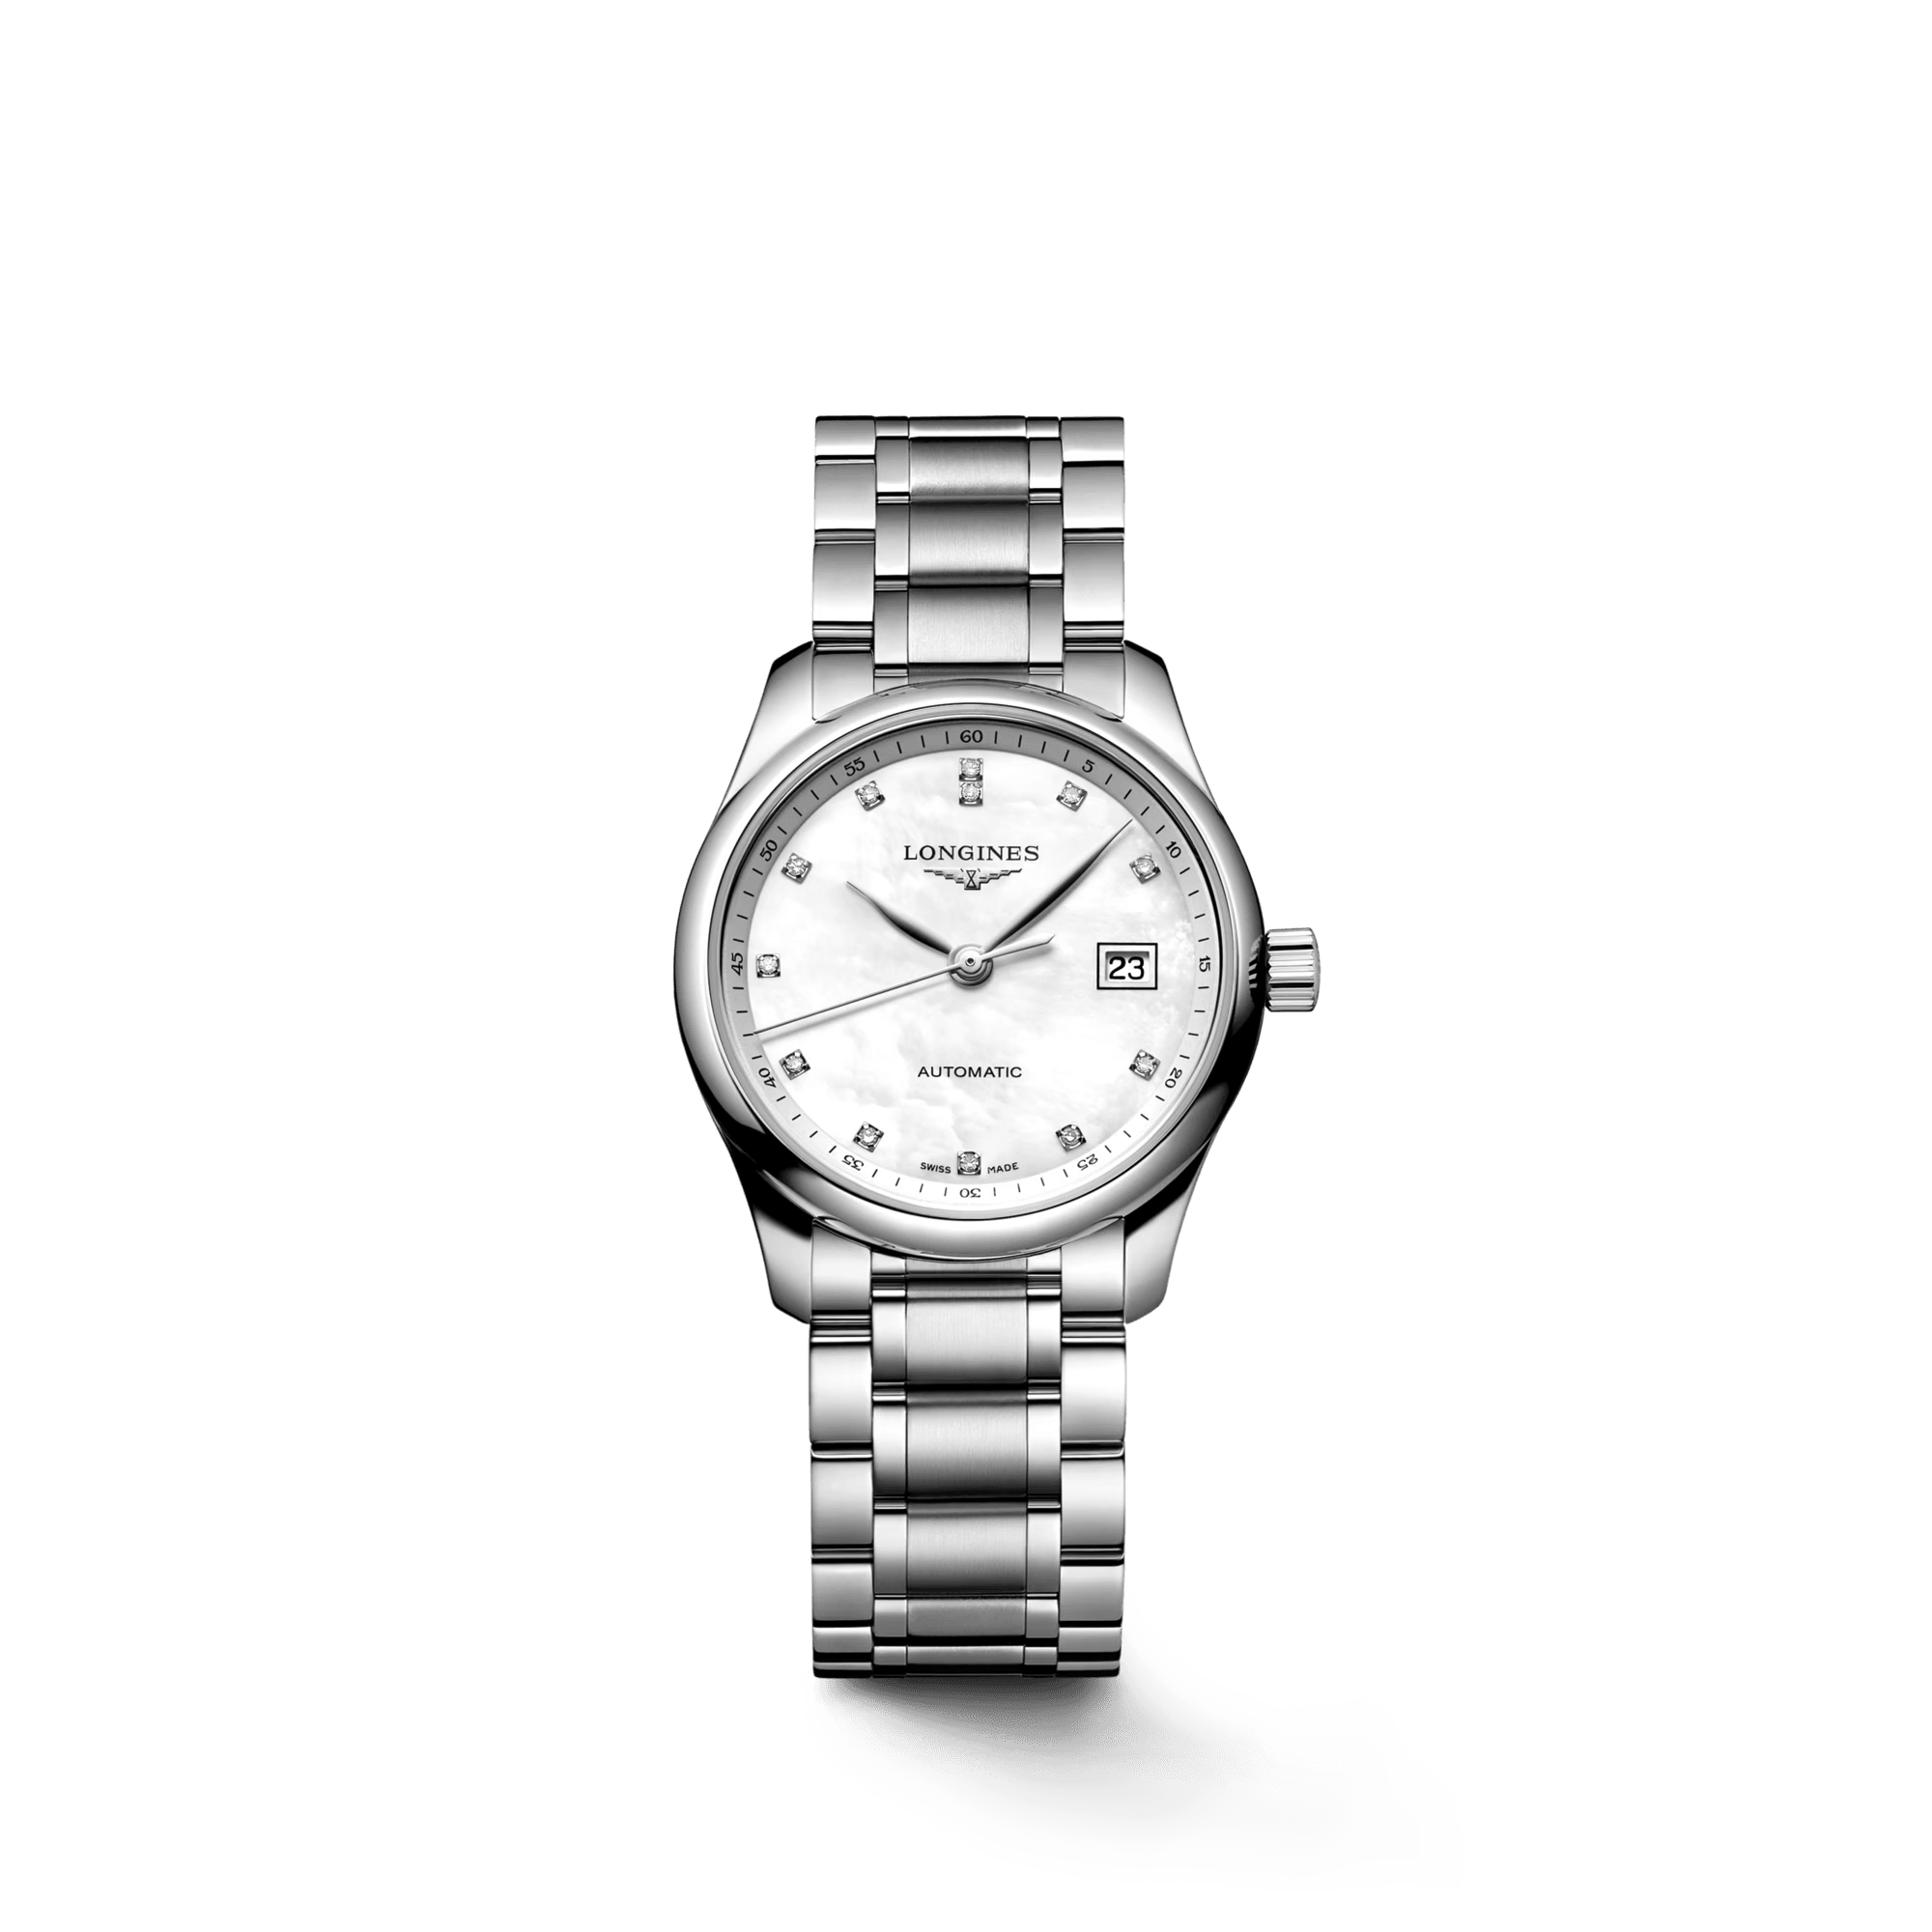 The Longines Master Collection Automatic Women's Watch L22574876